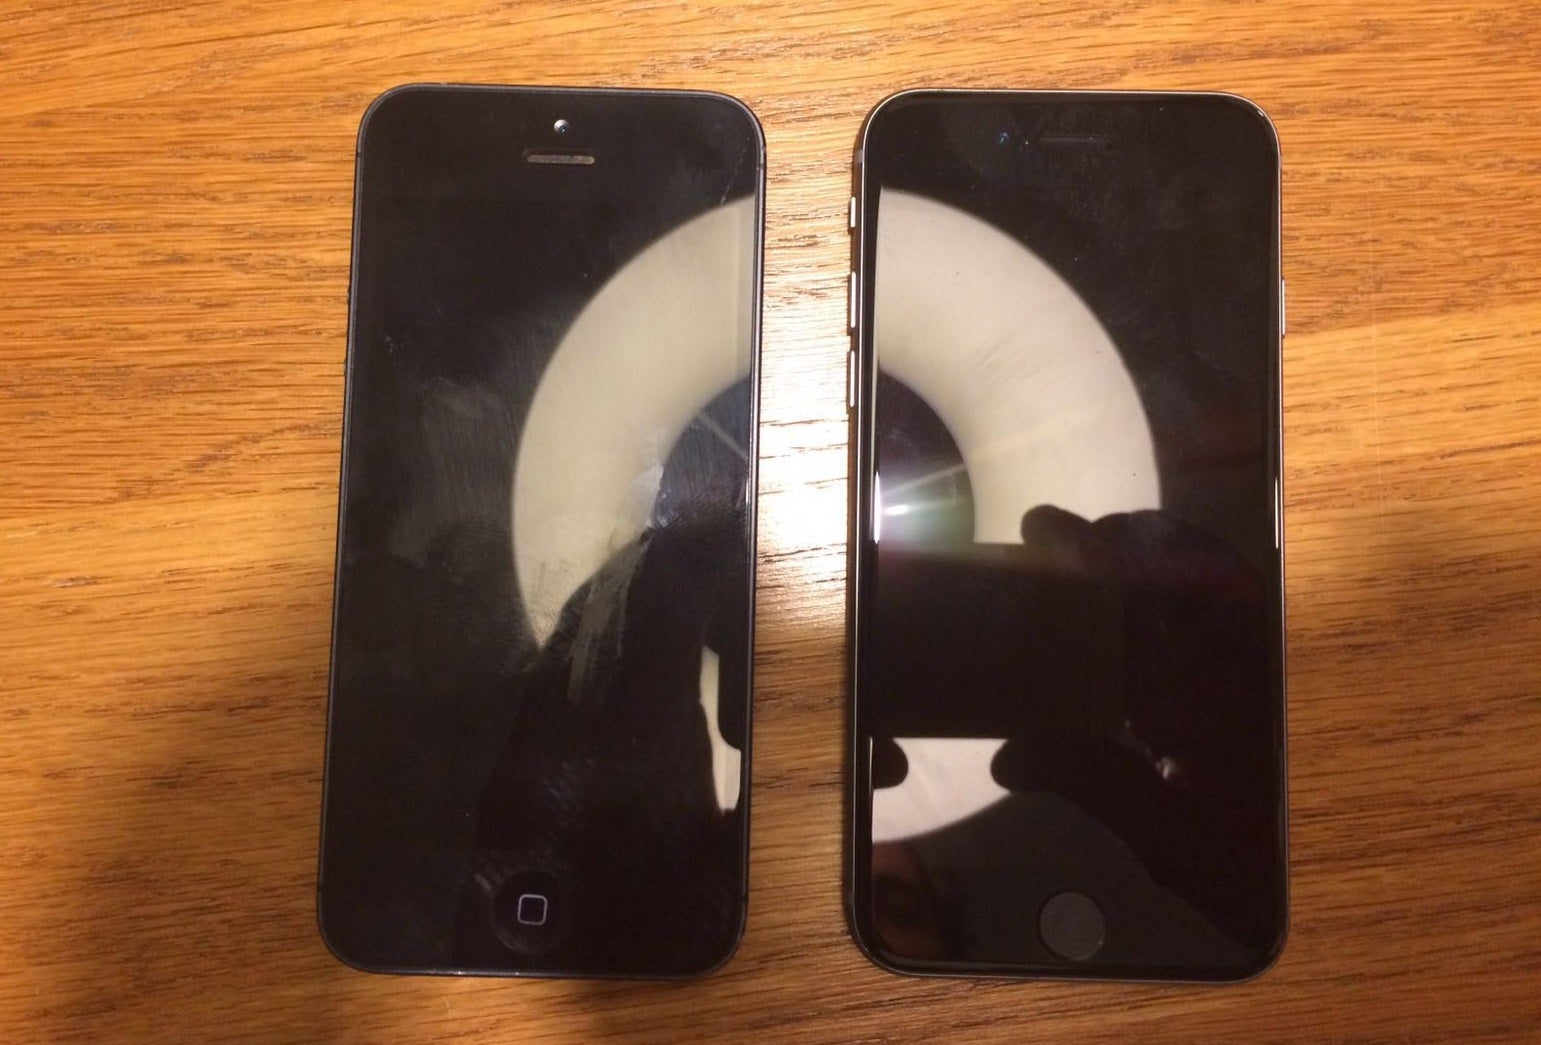 iPhone 5se (right) pictured next to the iPhone 5. - Apple iPhone 5se rumor review: everything we know about the brave little 4-incher